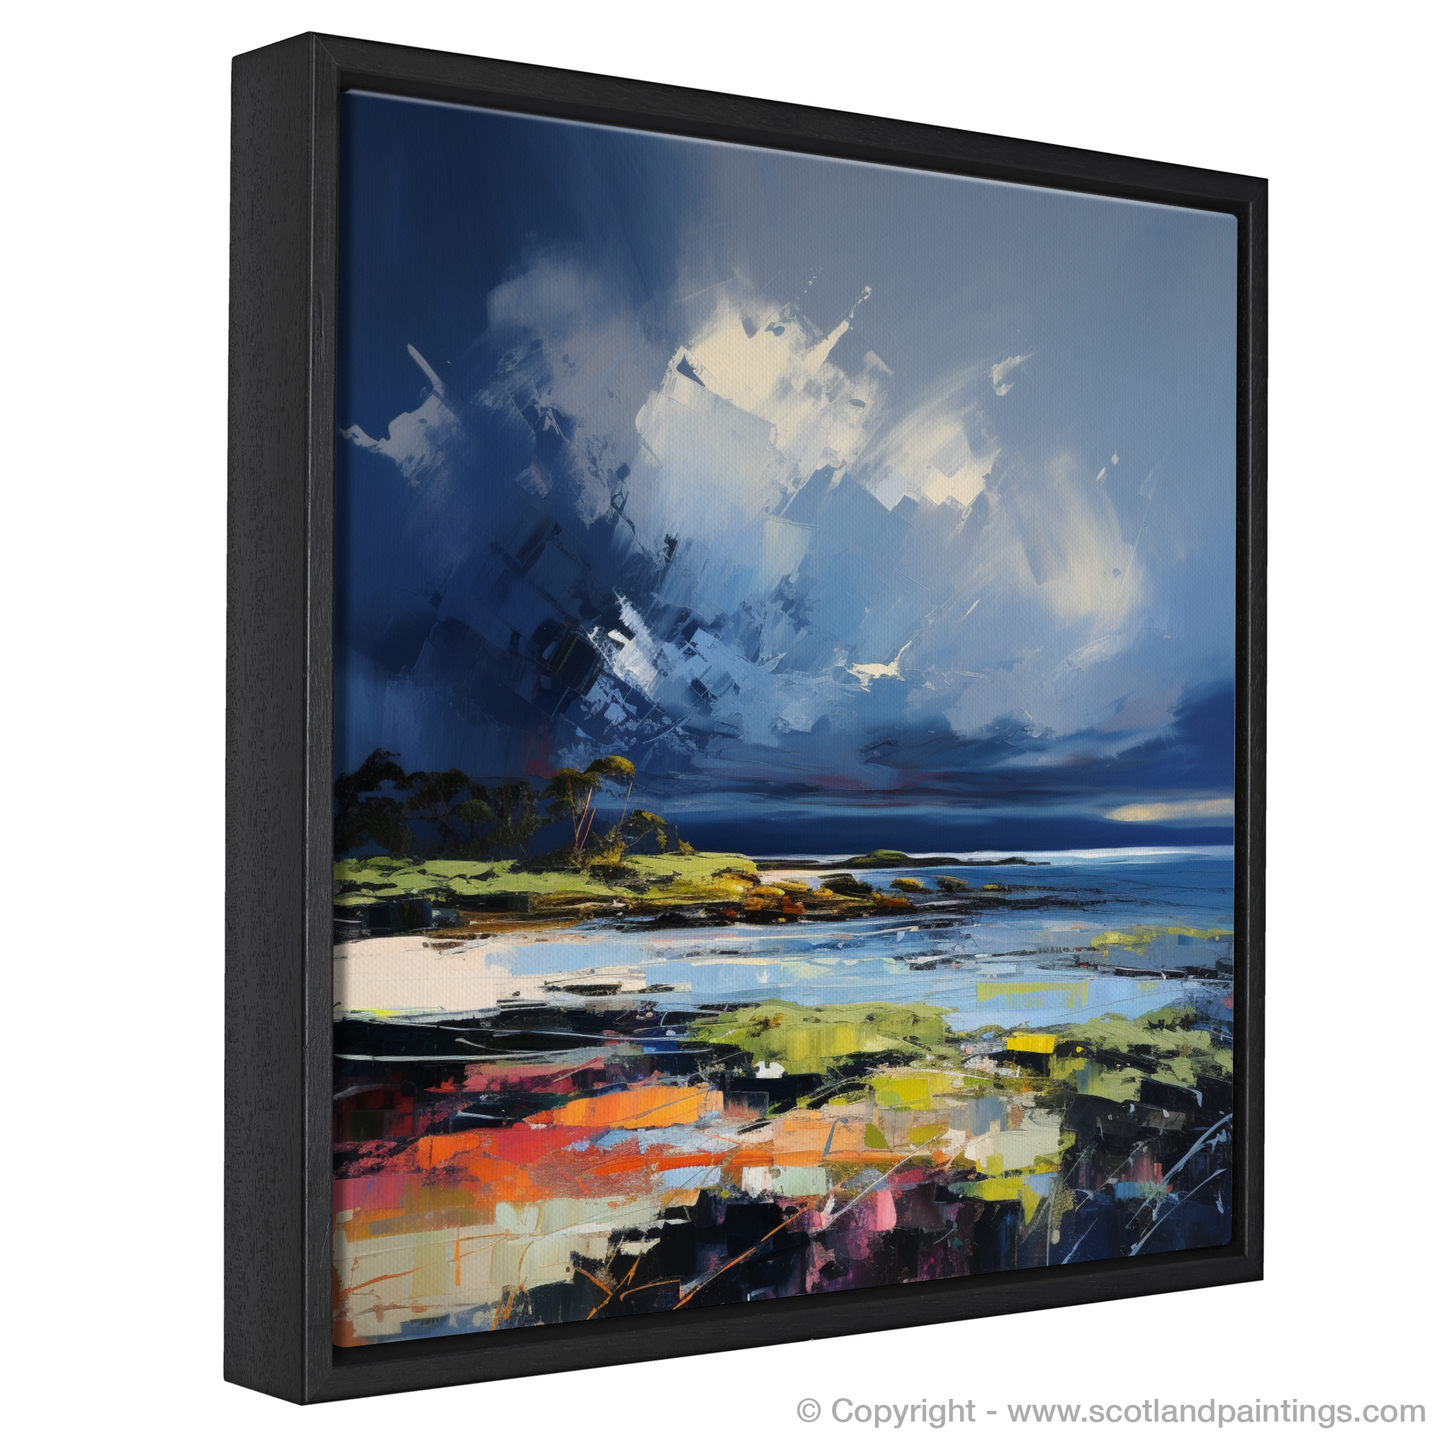 Painting and Art Print of Largo Bay with a stormy sky entitled "Storm Over Largo Bay: An Expressionist Ode to Scottish Shores".